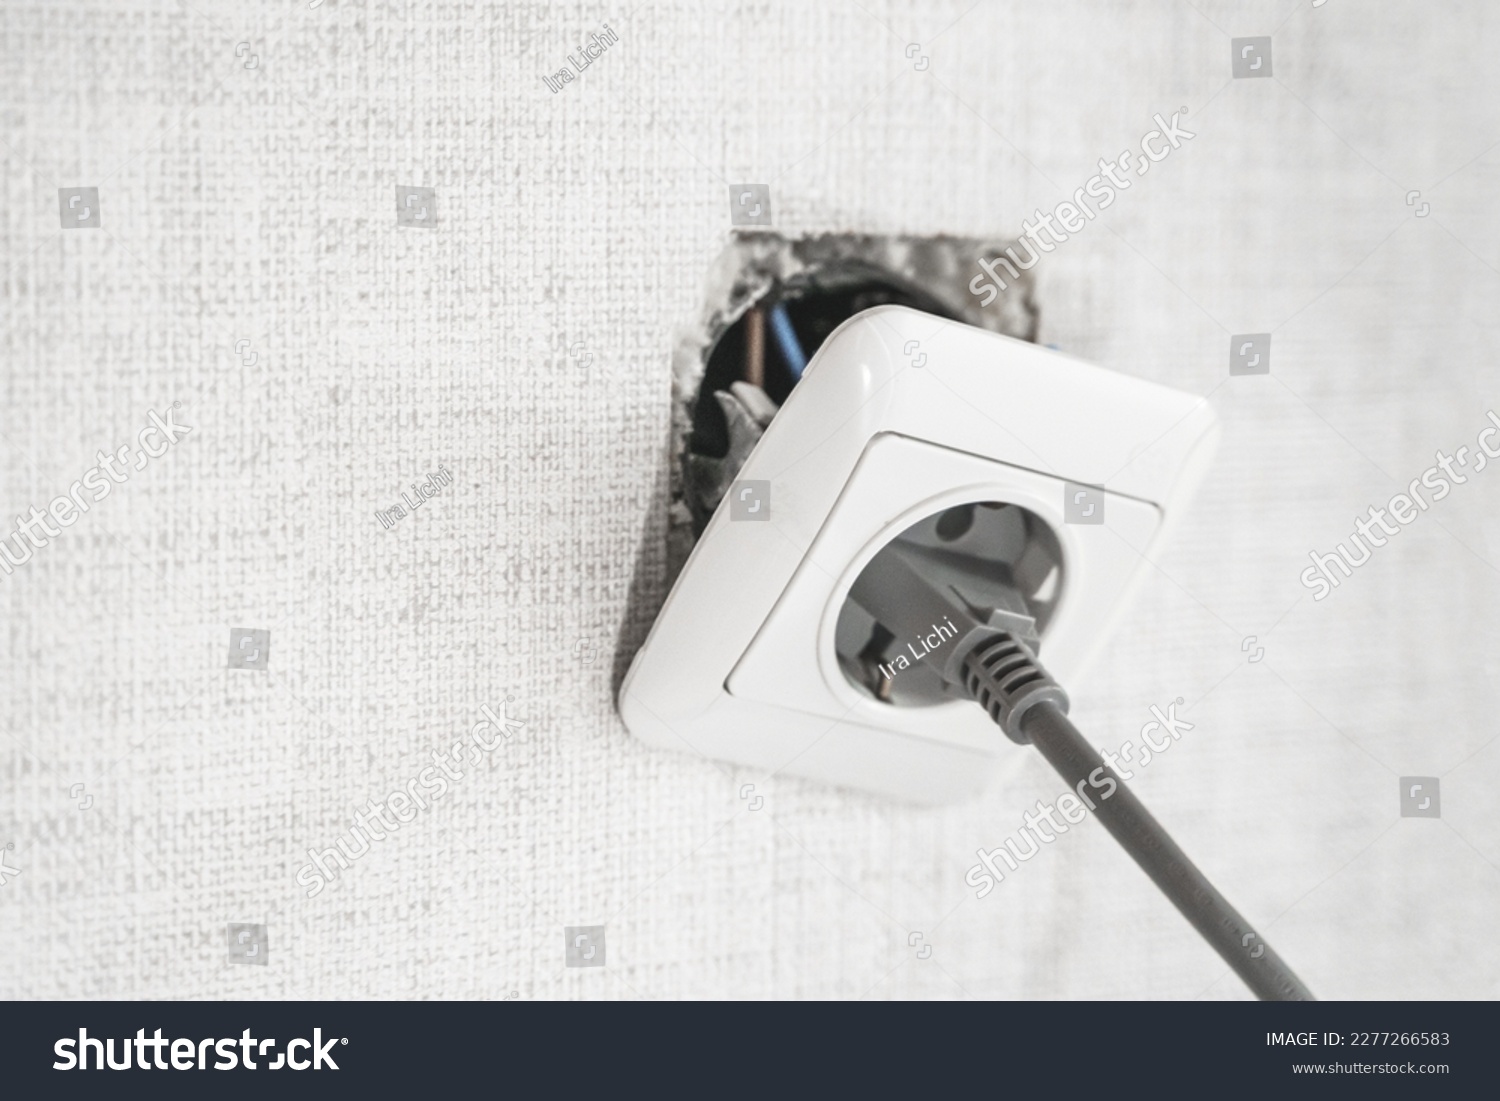 Dangerous bad,broken socket,plug in bathroom,falling out of wall. Outlet installation in old apartment. Poor electrical wire,repair.Terrible do-it-yourself repairmen.Short circuit risk,electric shock. #2277266583